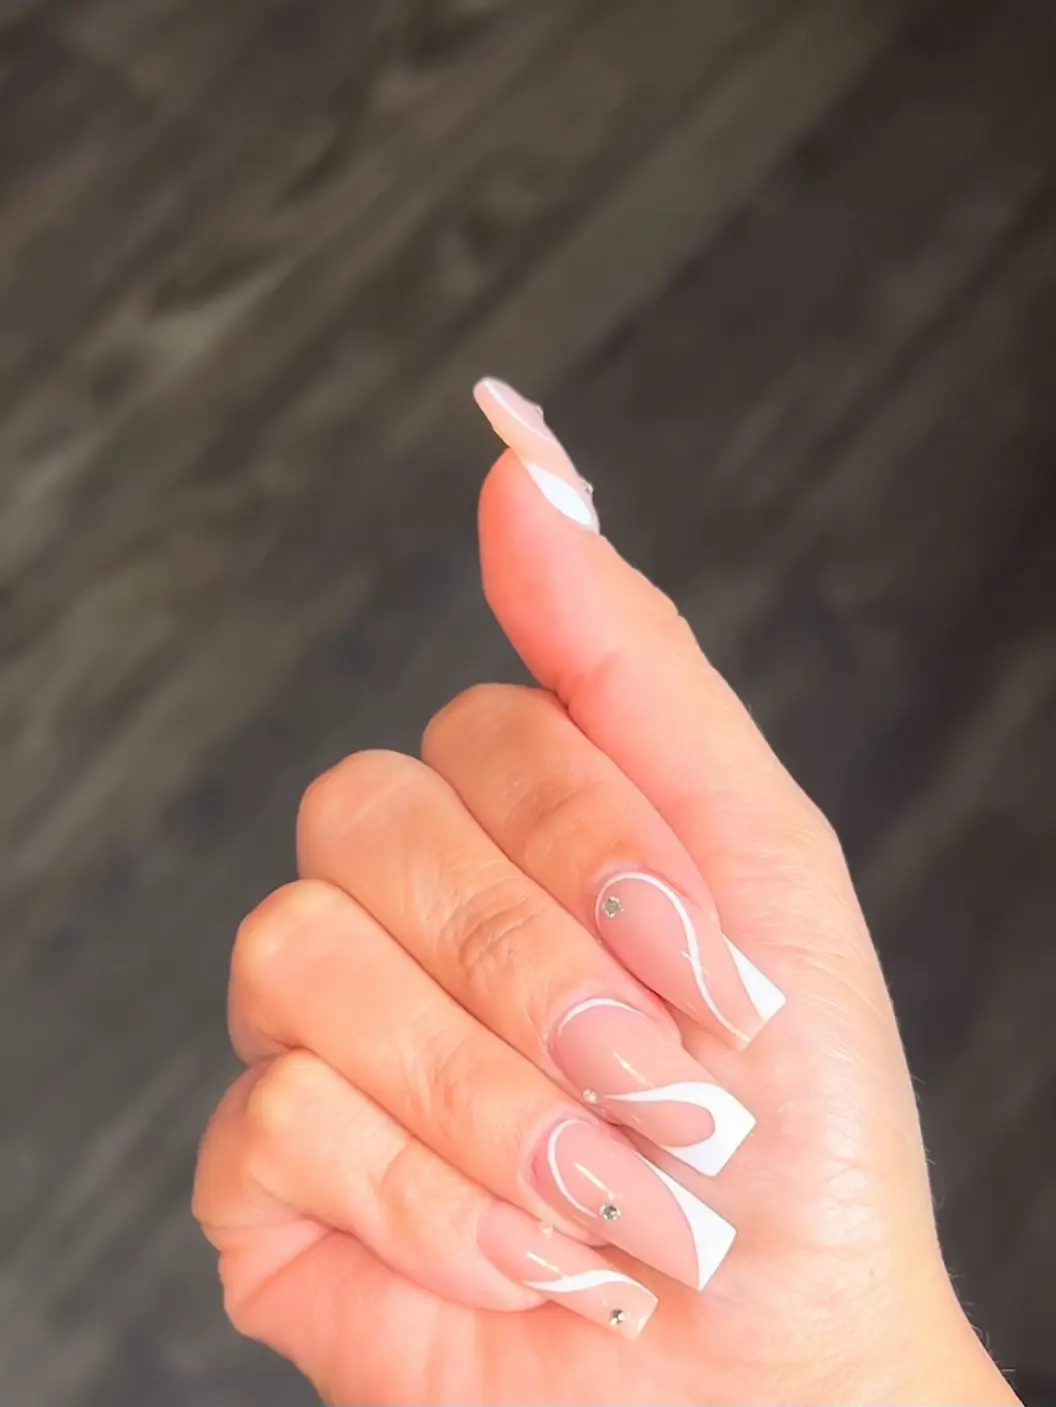 luminary w/ chrome and rhinestones. my nail girl slays and she's only been  doing nails for like 6ish months?! : r/Nails